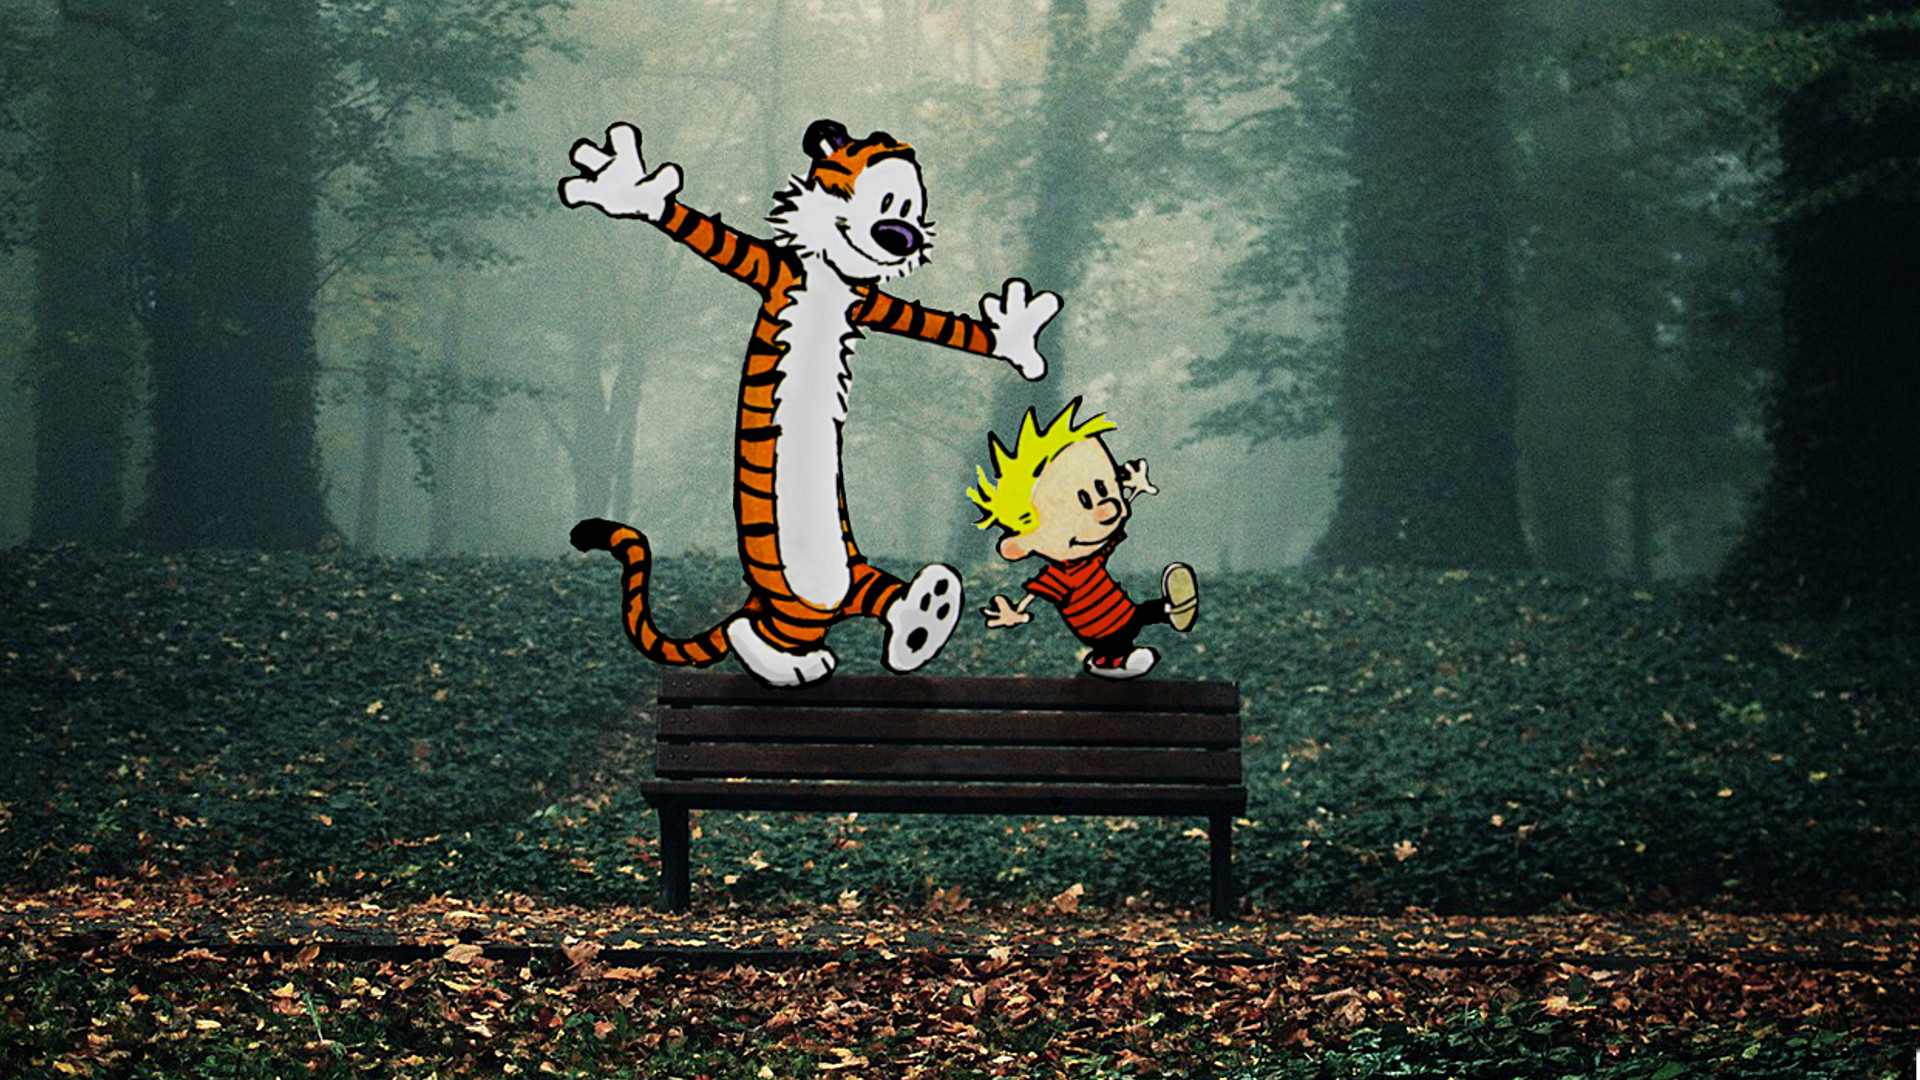 Calvin and Hobbes wallpaper by gwoovysmoothy on DeviantArt